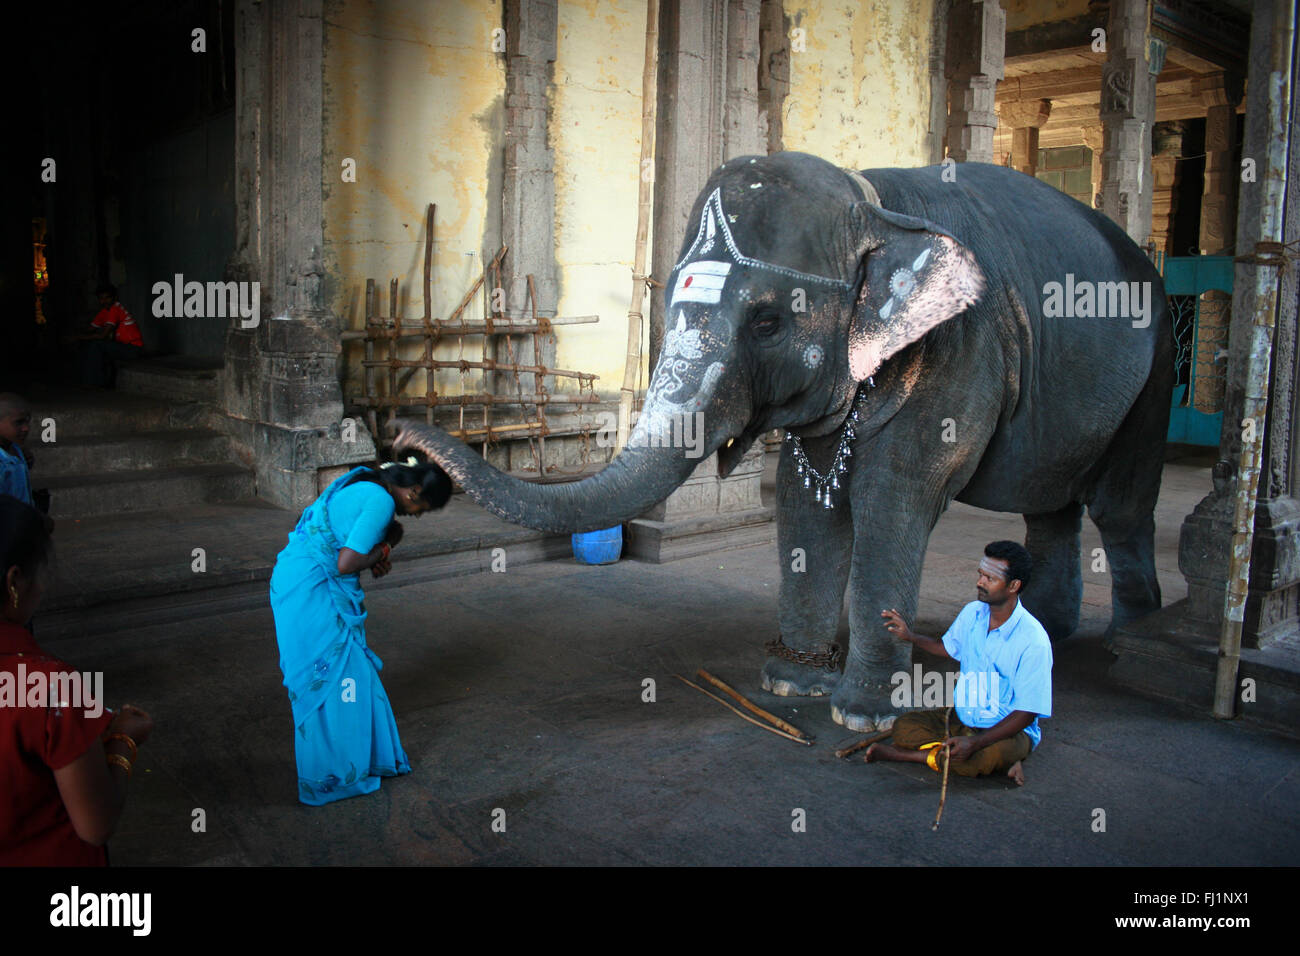 An holy elephant gives blessing to the visitors in Sri Meenakshi Temple, Madurai Stock Photo